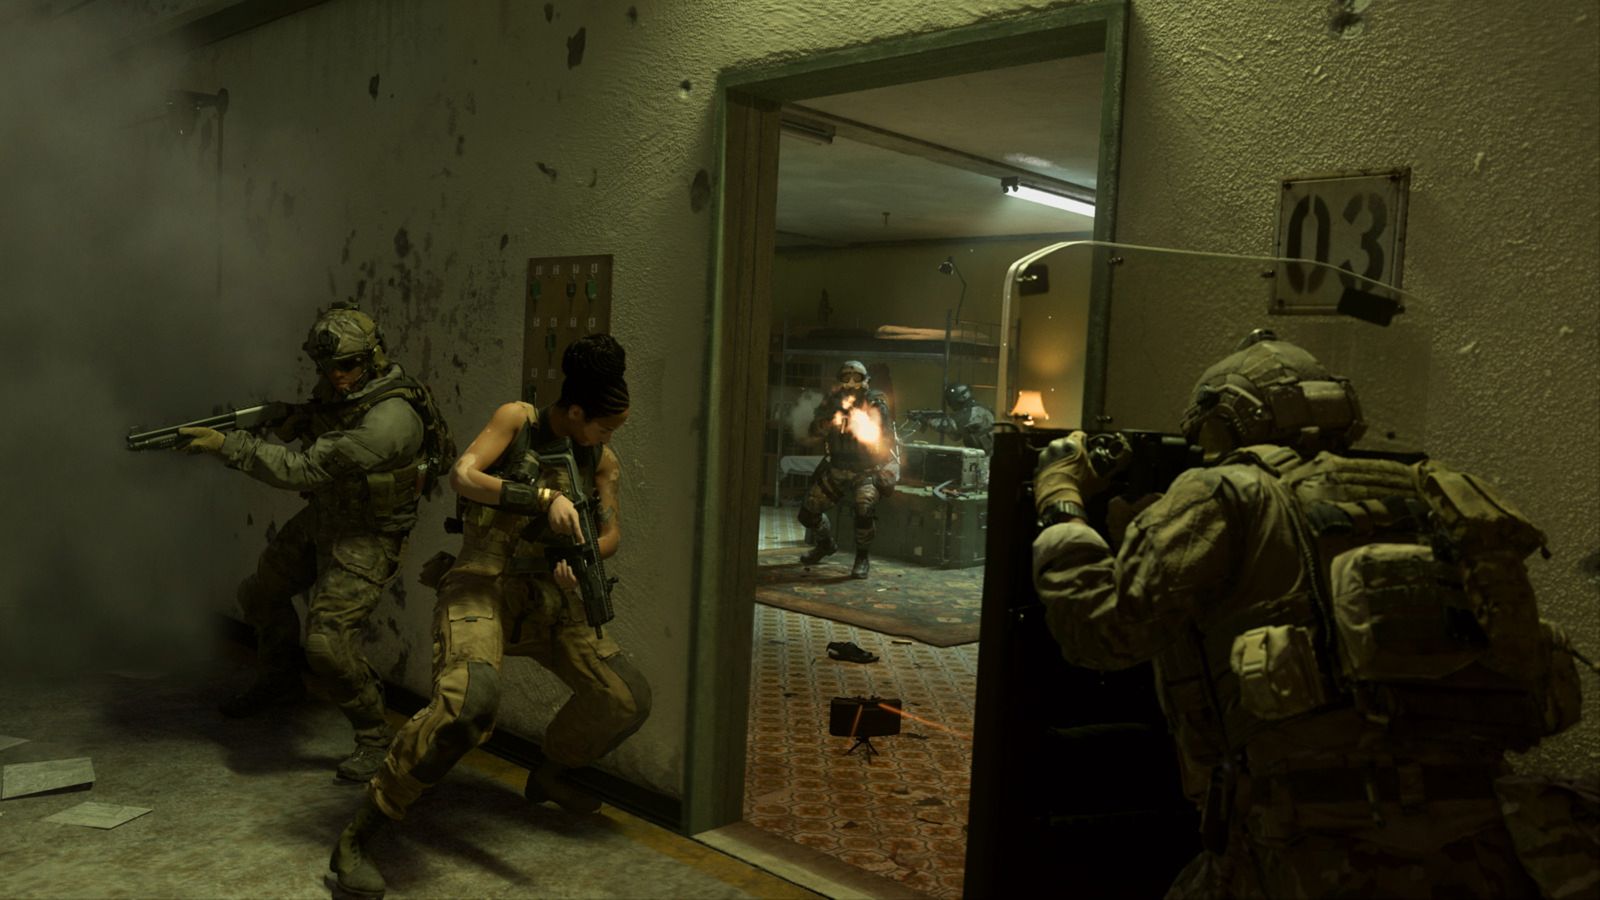 soldiers cover behind a wall as an enemy fires - Modern Warfare 2 Campaign Missing DLC Pack Error